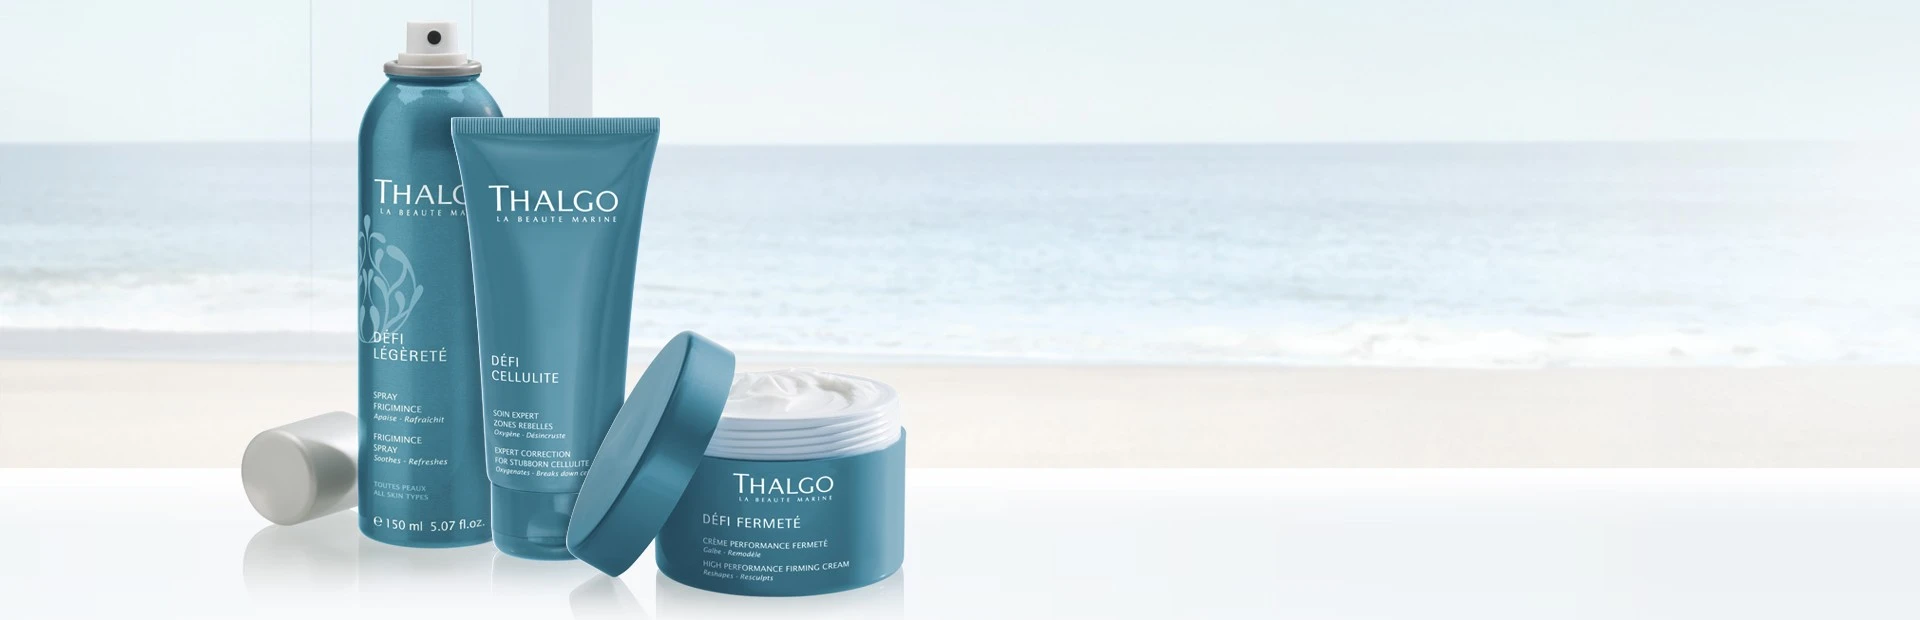 Menosvelt - Nutrition - Thalgo, Silhouette Shape & Correct, Marine-based  slimming and firming products, Thalgo spas and salons